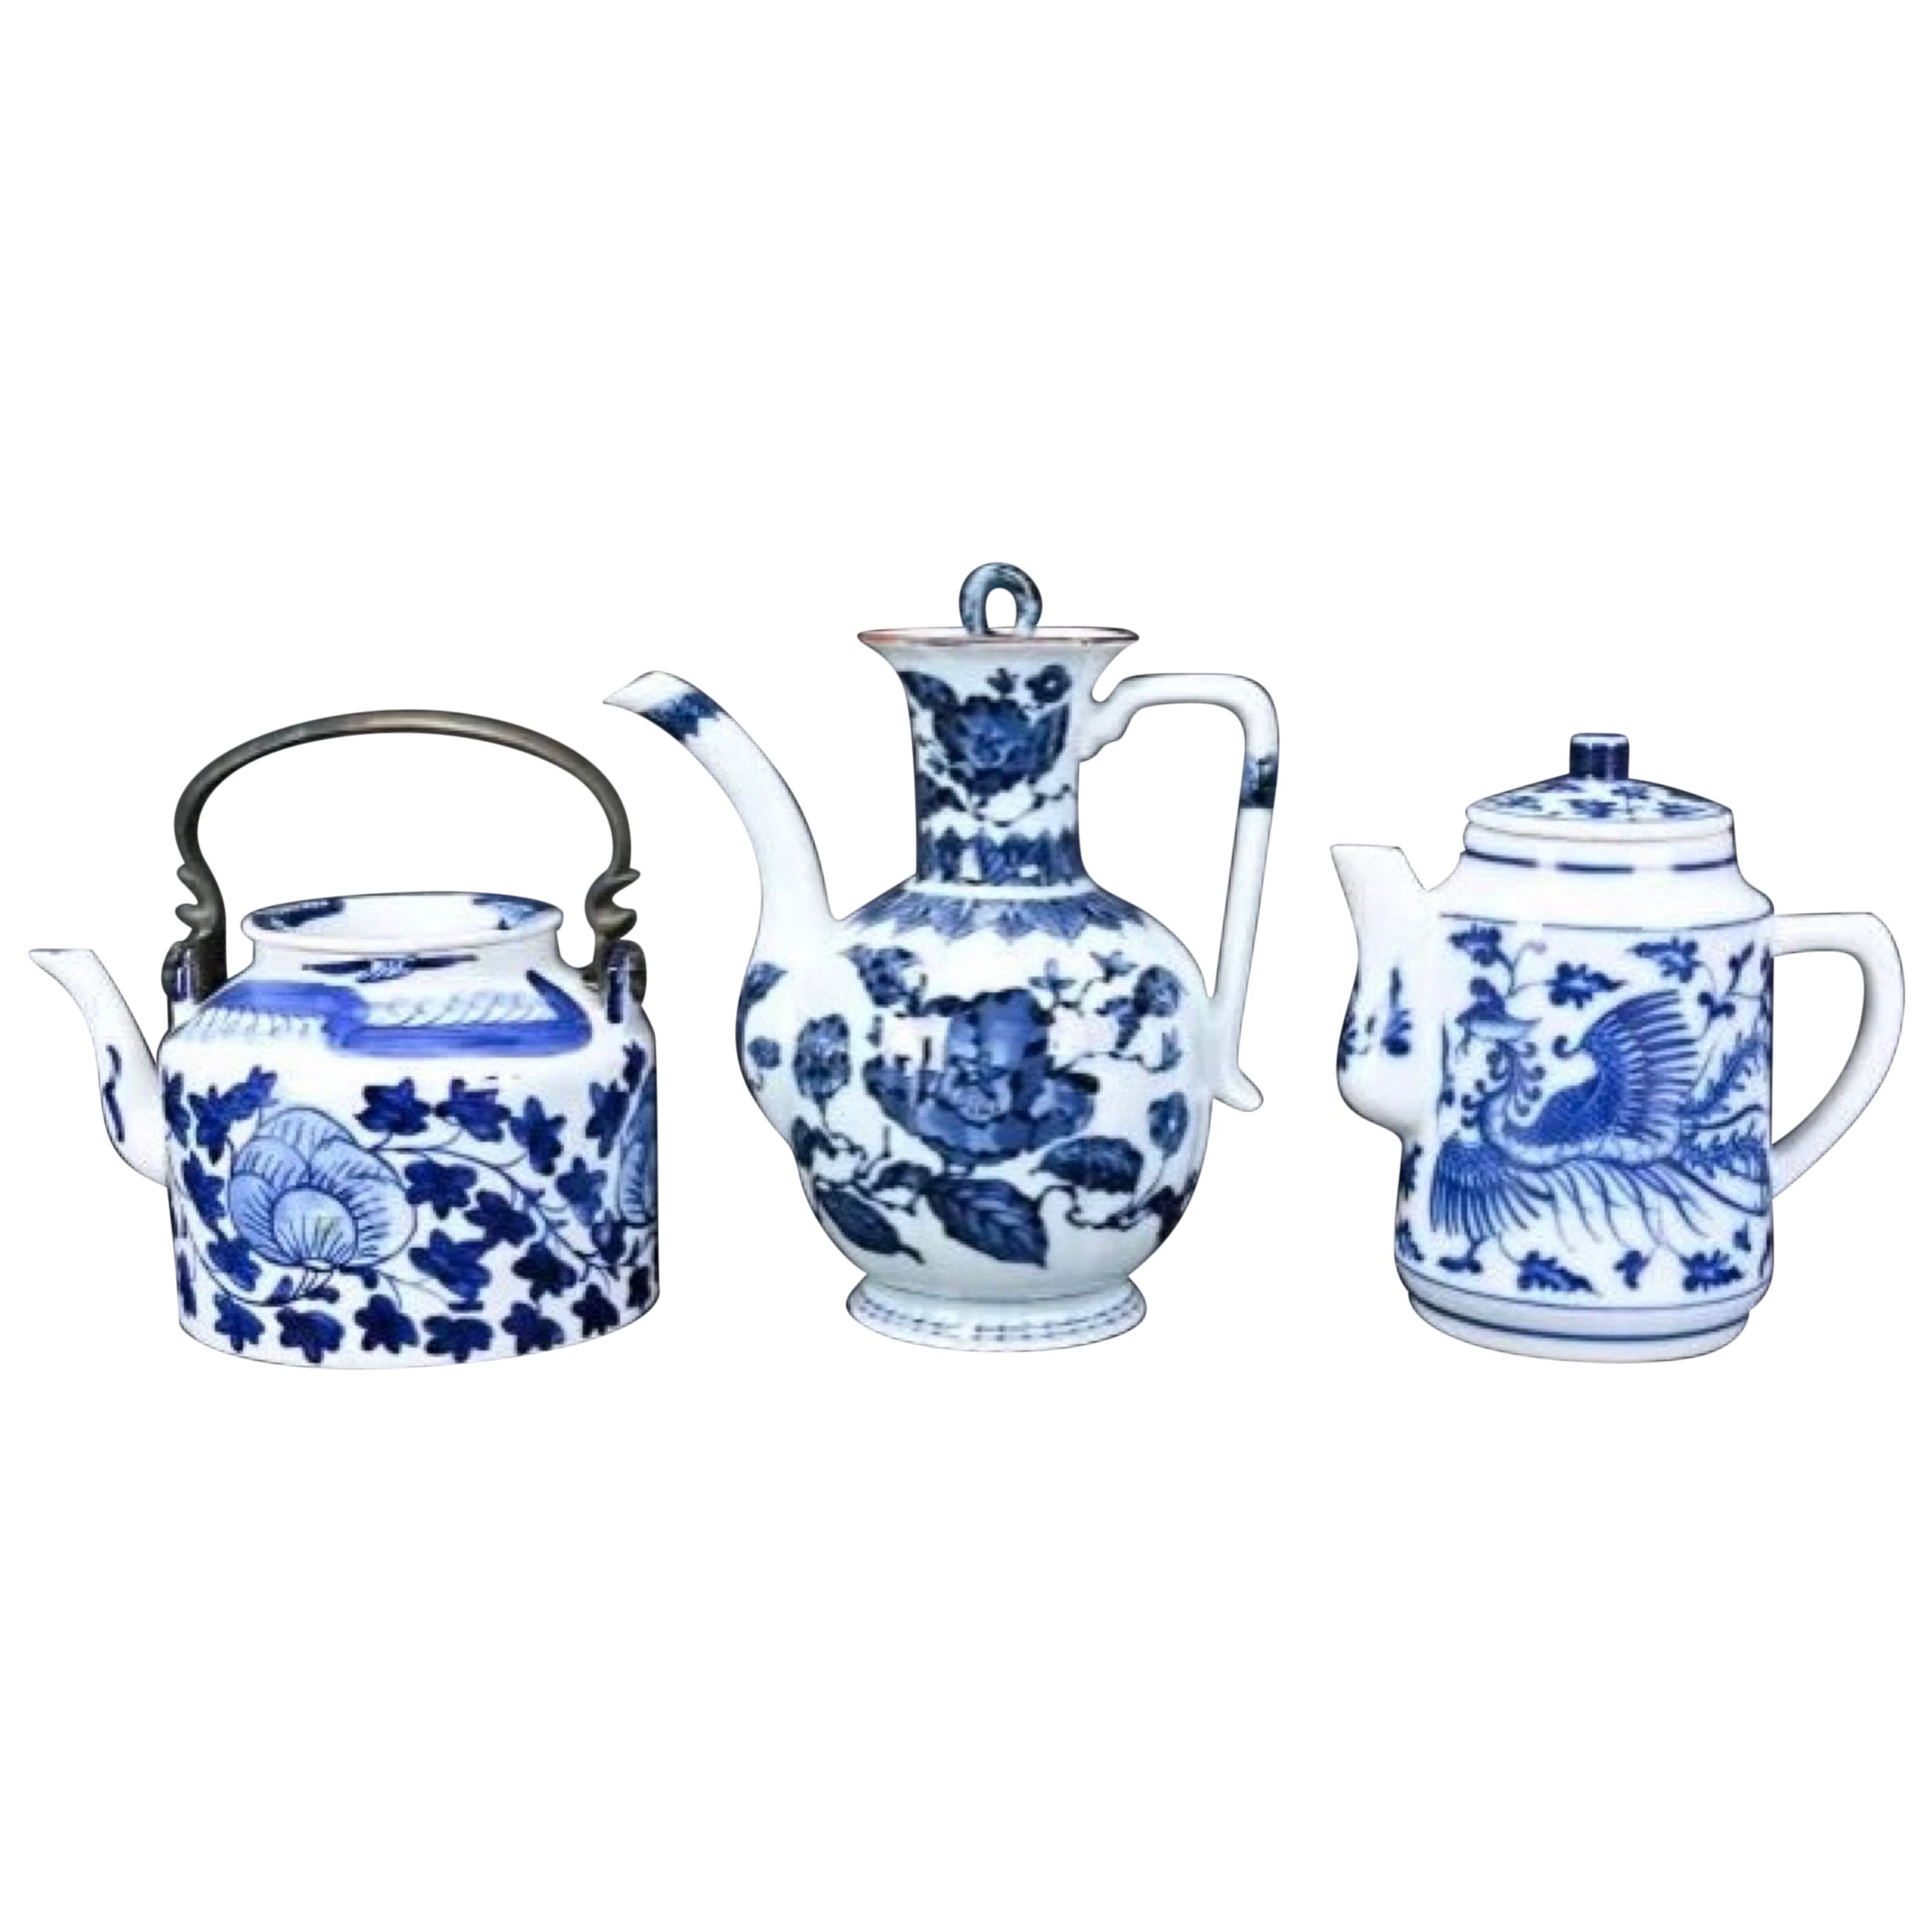 Collection of Three Chinese Porcelain Blue & White Tea Pots